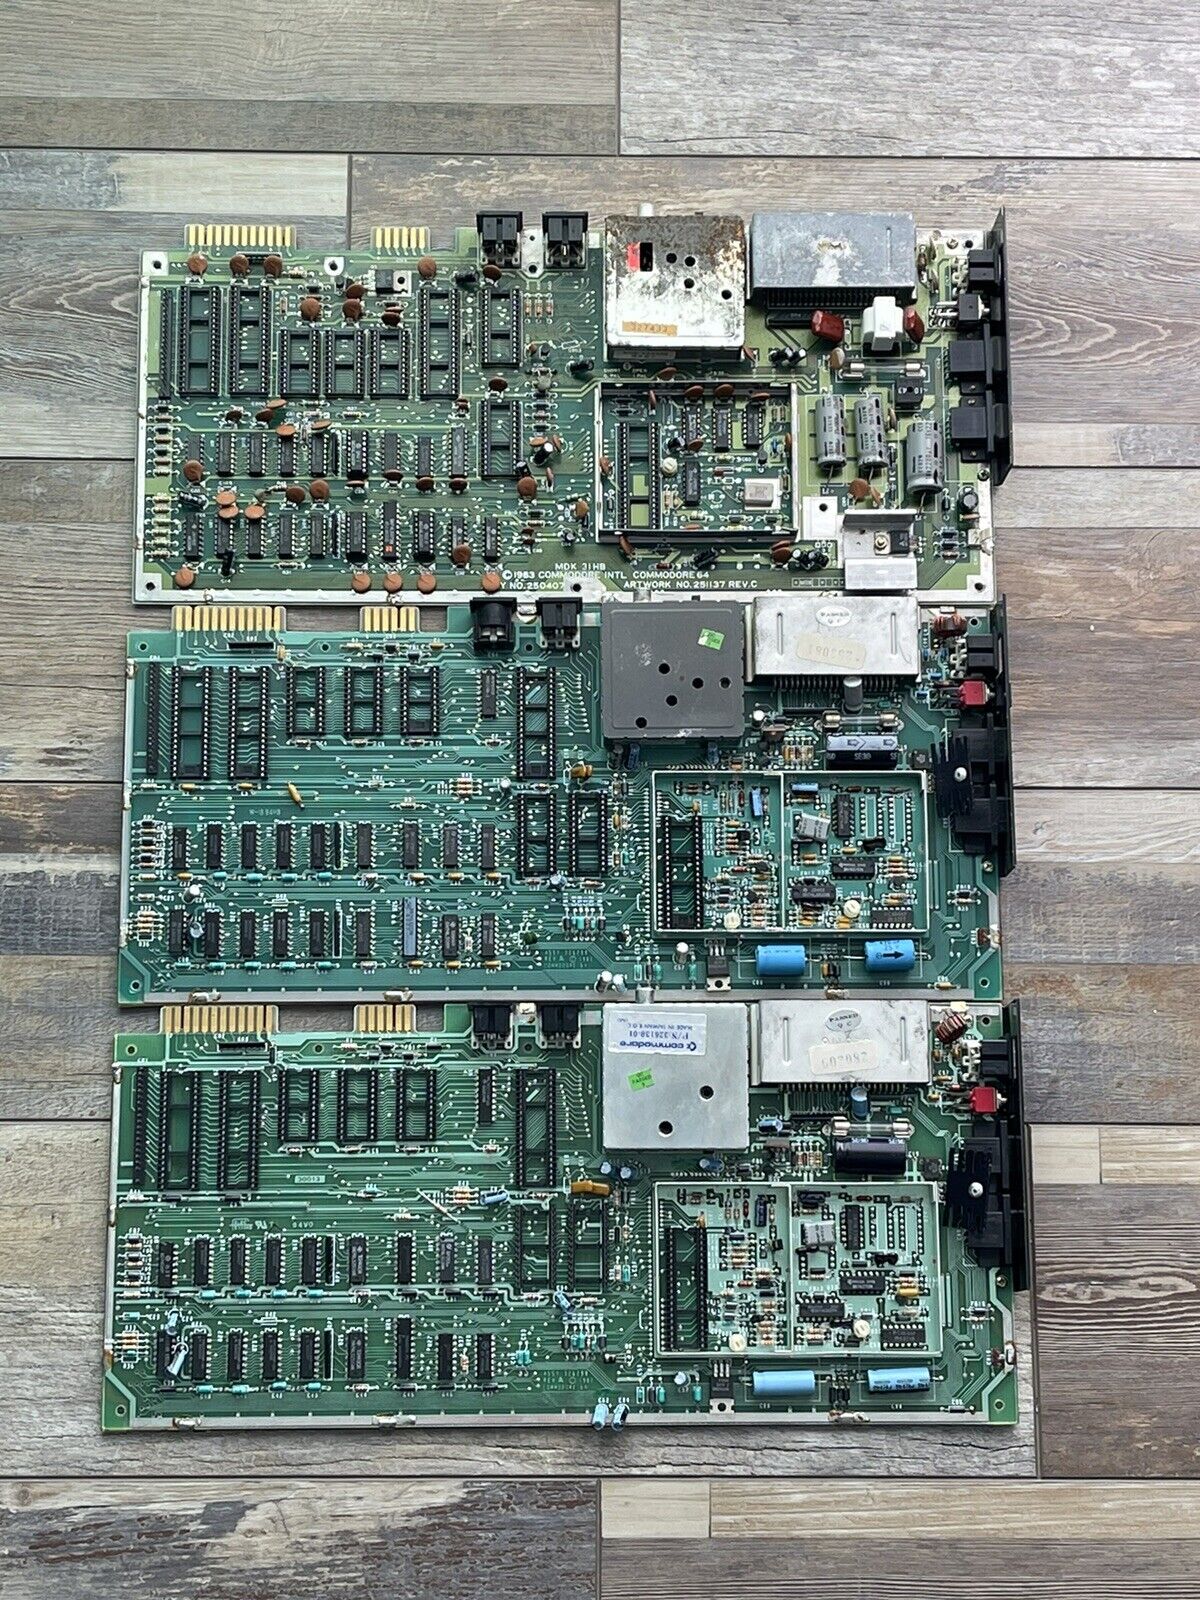 Lot of 3 Commodore 64 motherboards for parts or repair